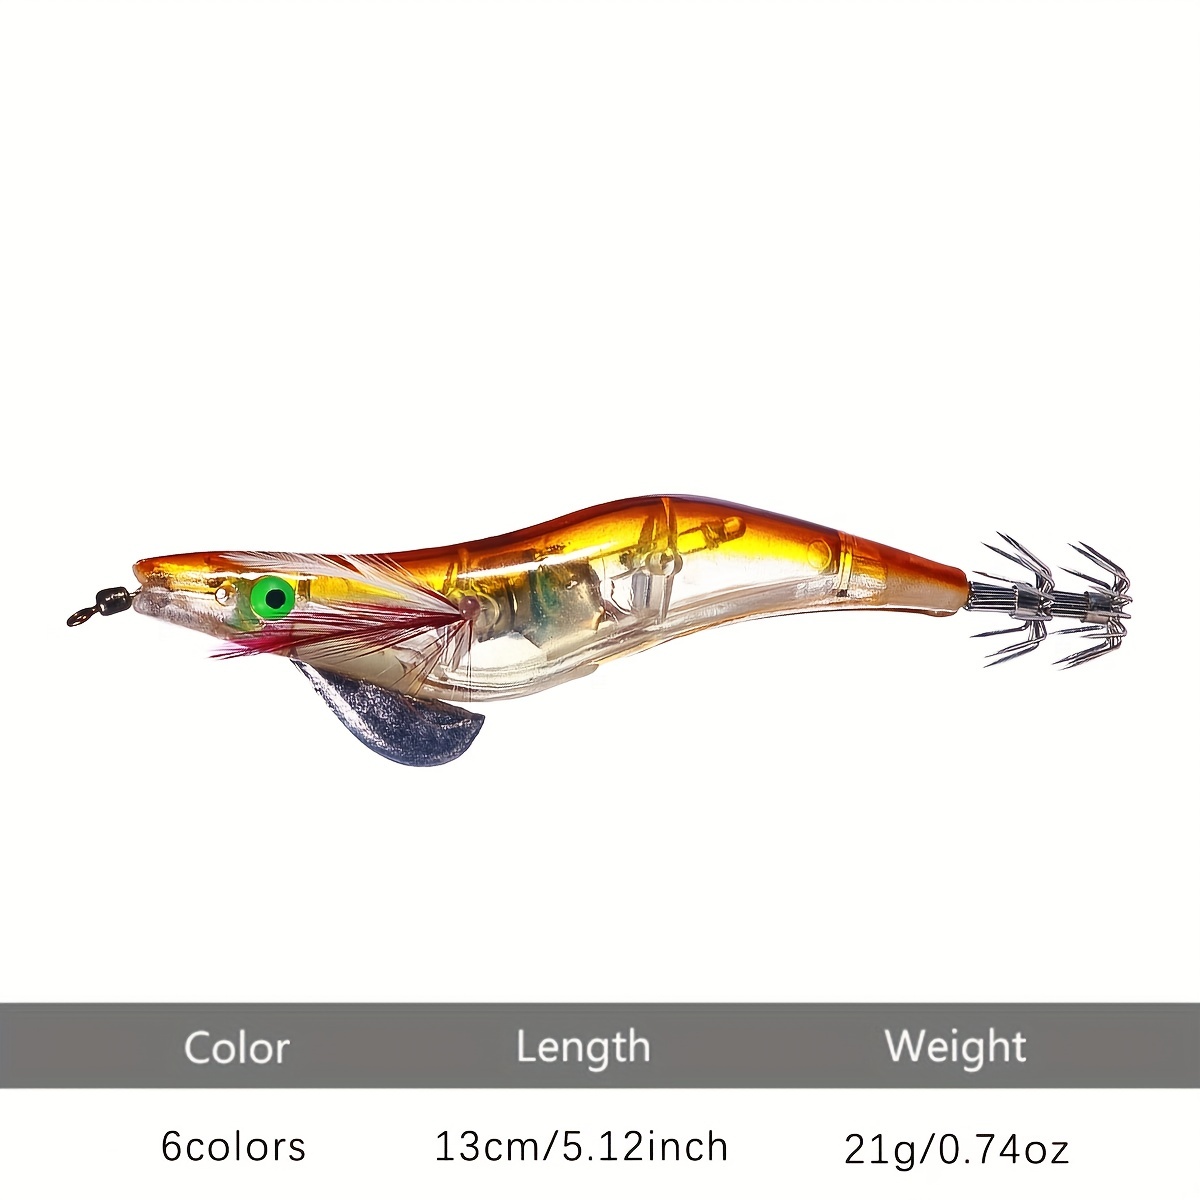 Luminous Electronic Shrimp Lure - Boost Your Fishing Success With